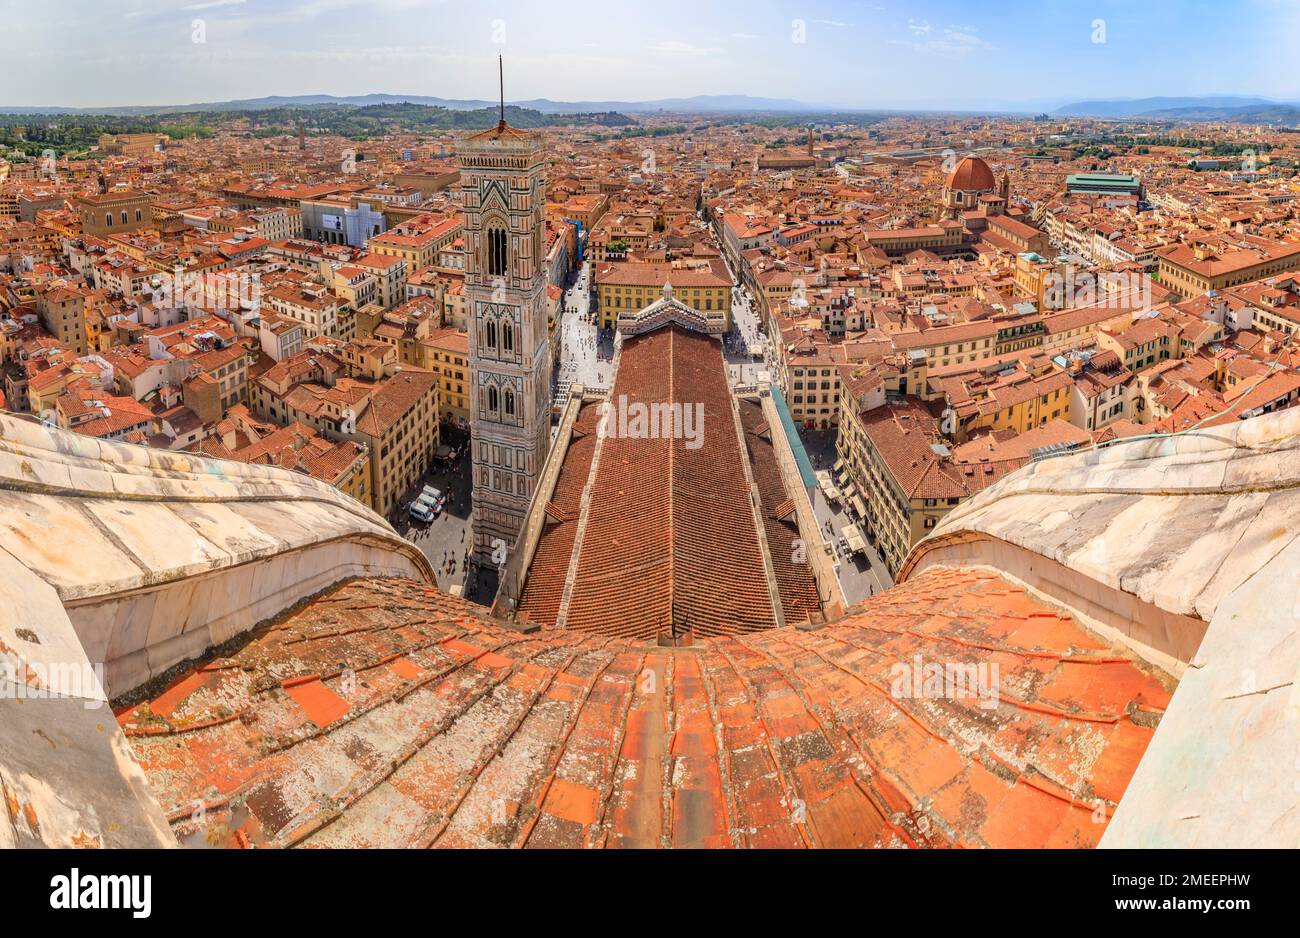 Aerial view of the red tiled Brunelleschi dome of Duomo Cathedral or Cattedrale di Santa Maria del Fiore and Giotto bell tower in Florence, Italy Stock Photo